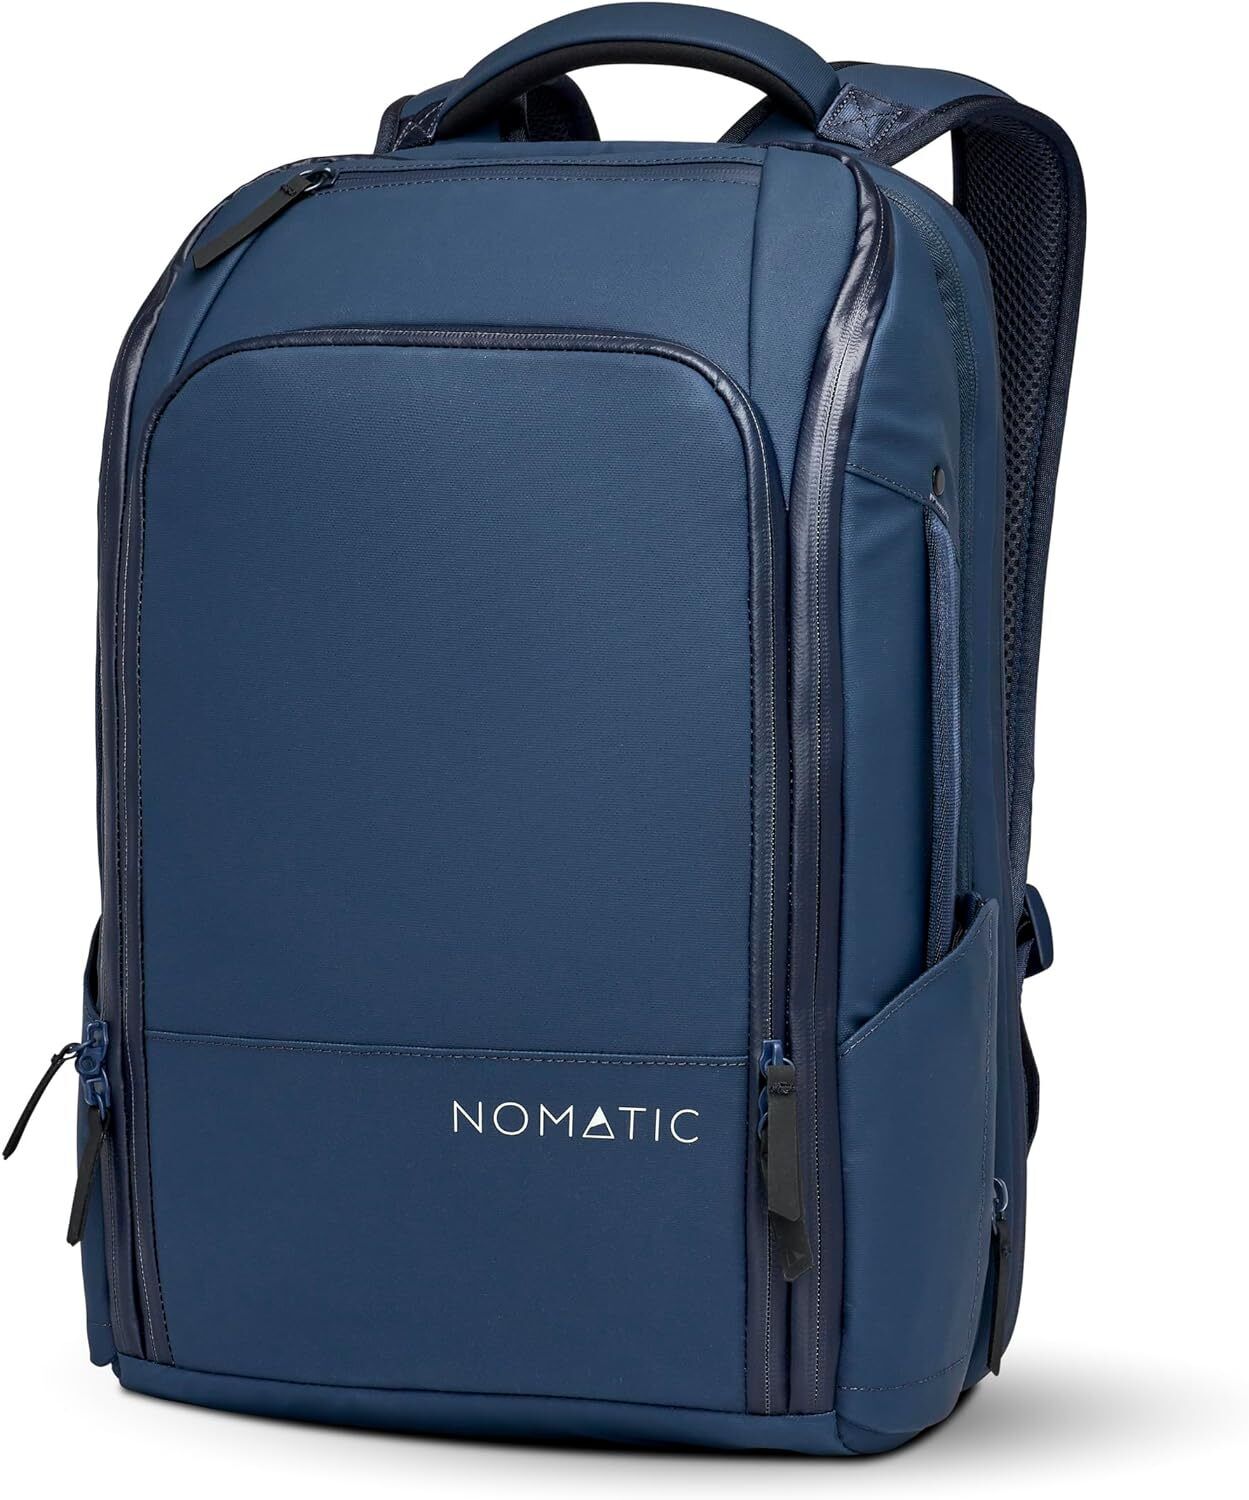 NOMATIC Travel Pack - 20L Water Resistant Laptop Bag - Navy, Navy 